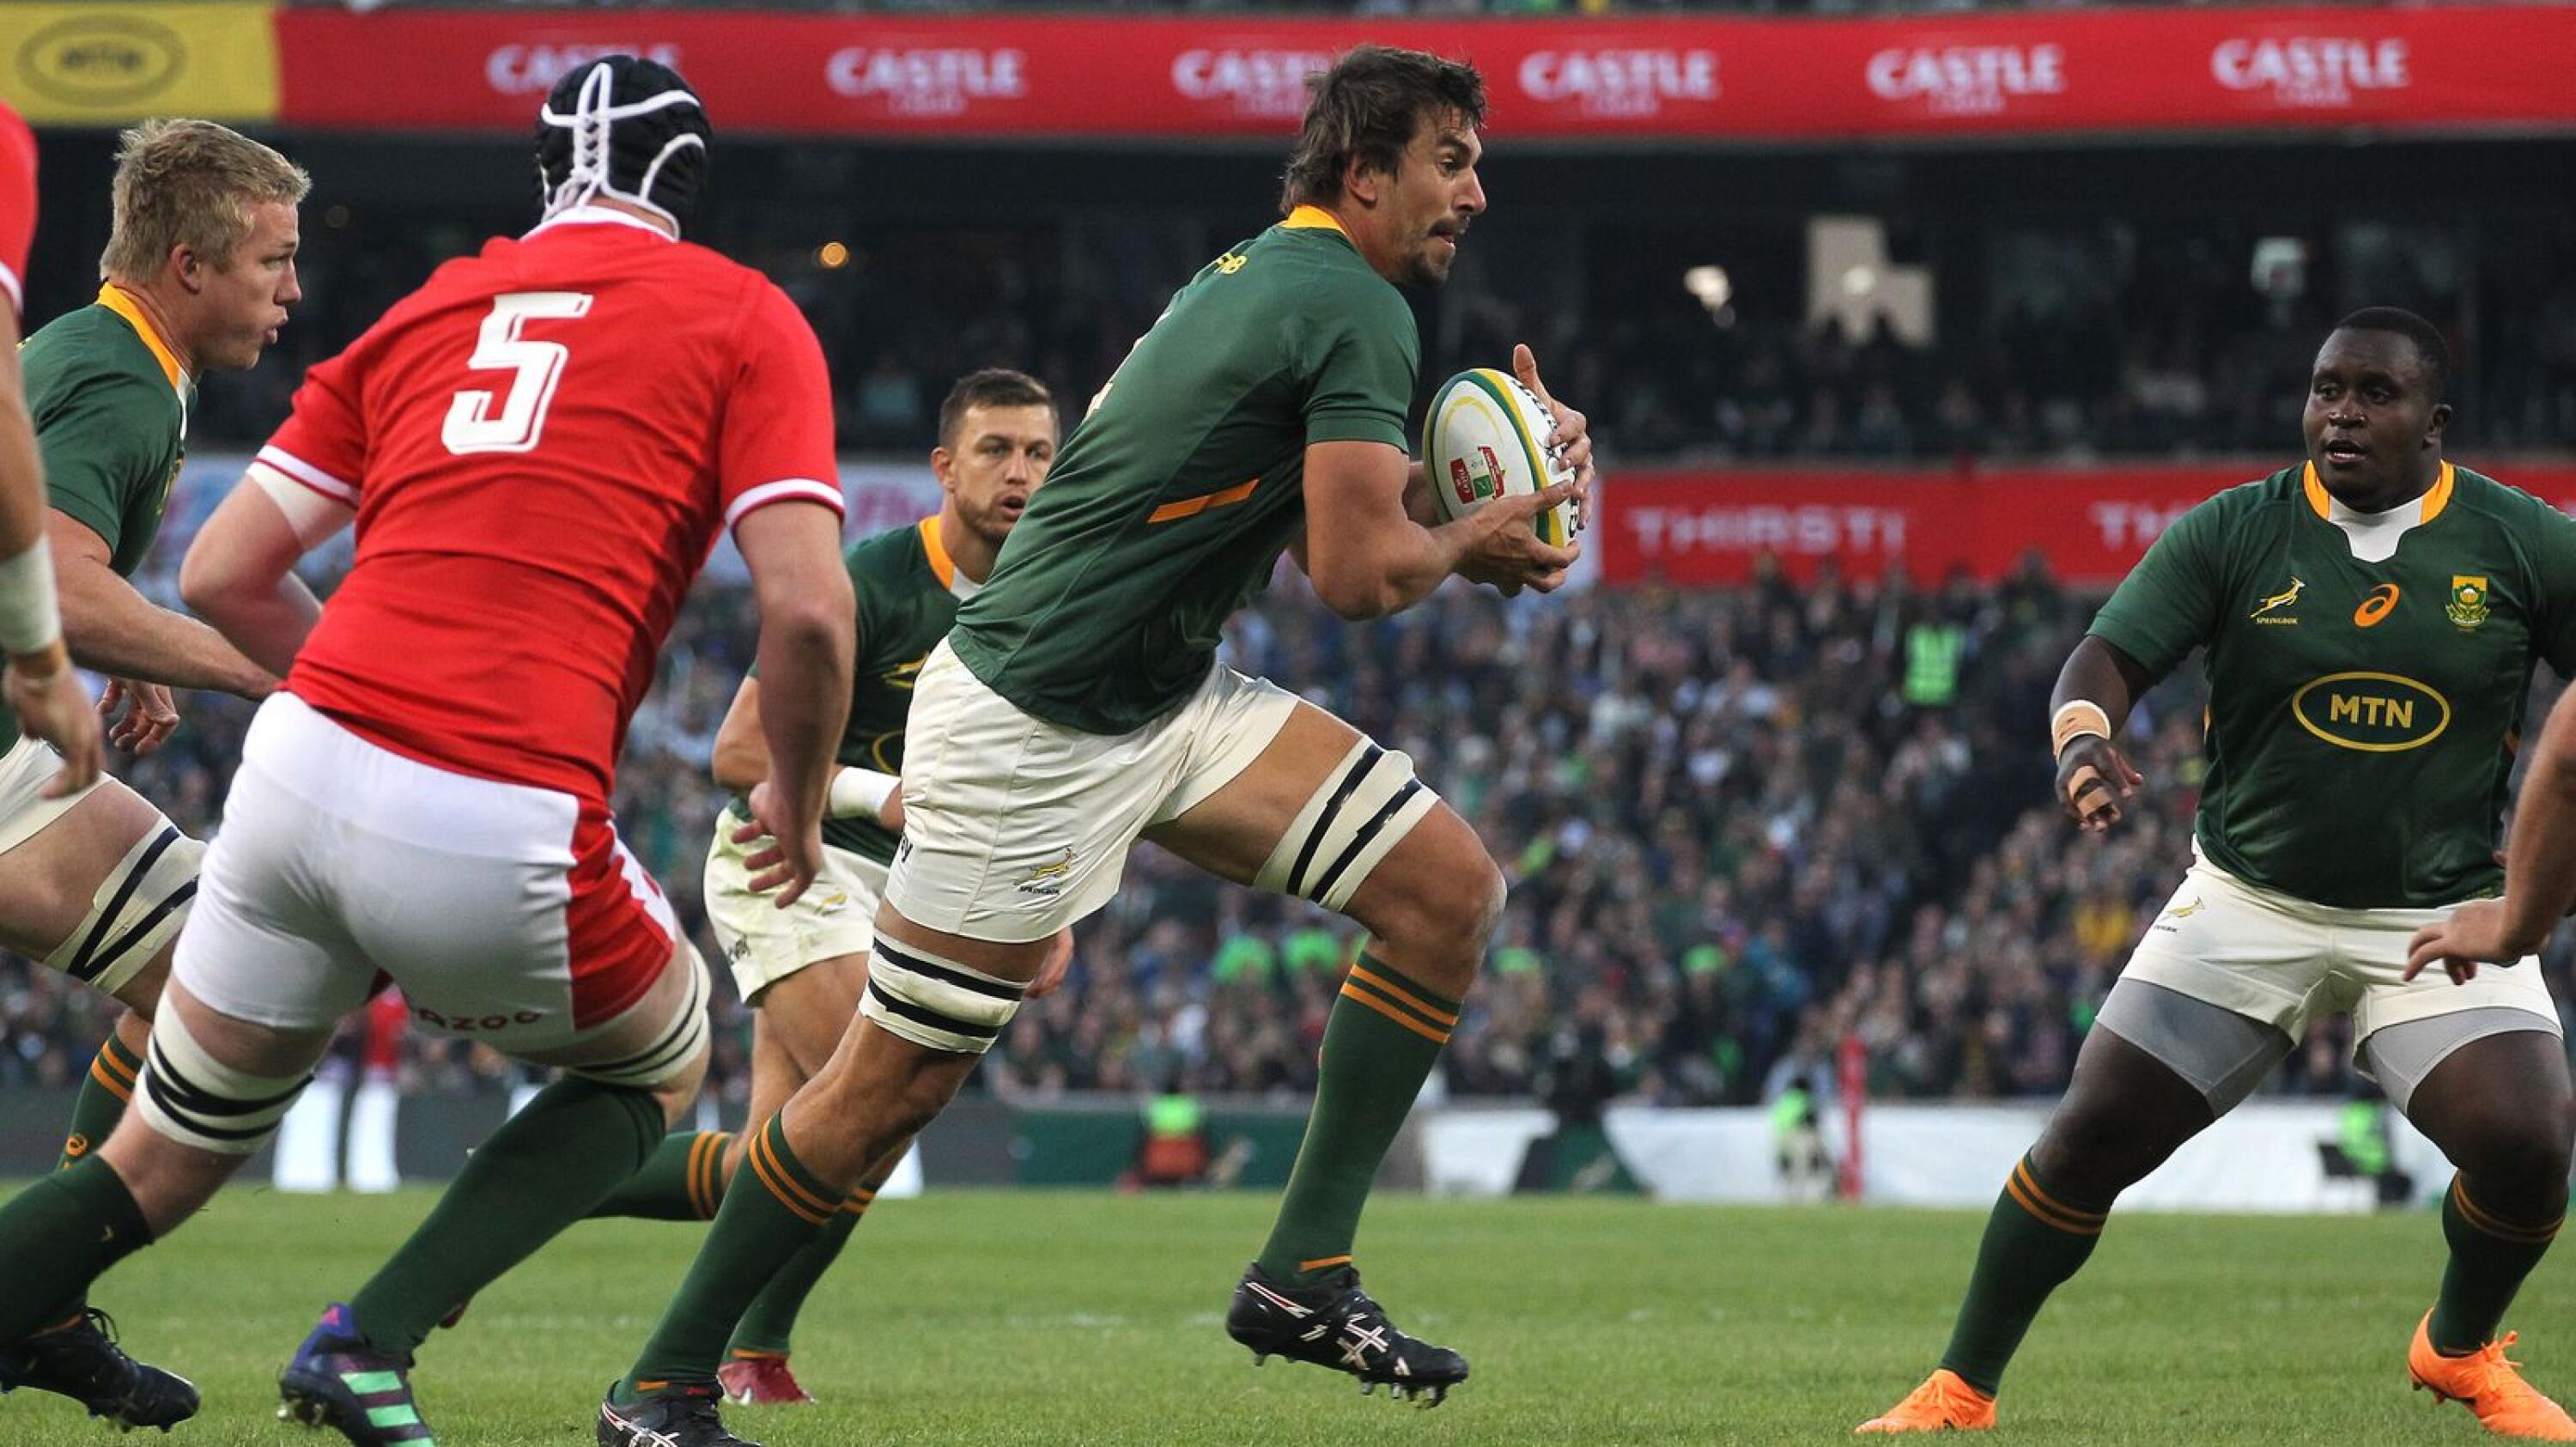 Eben Etzebeth of South Africa on the attack during the Test match against Wales held at Toyota Stadium in Bloemfontein